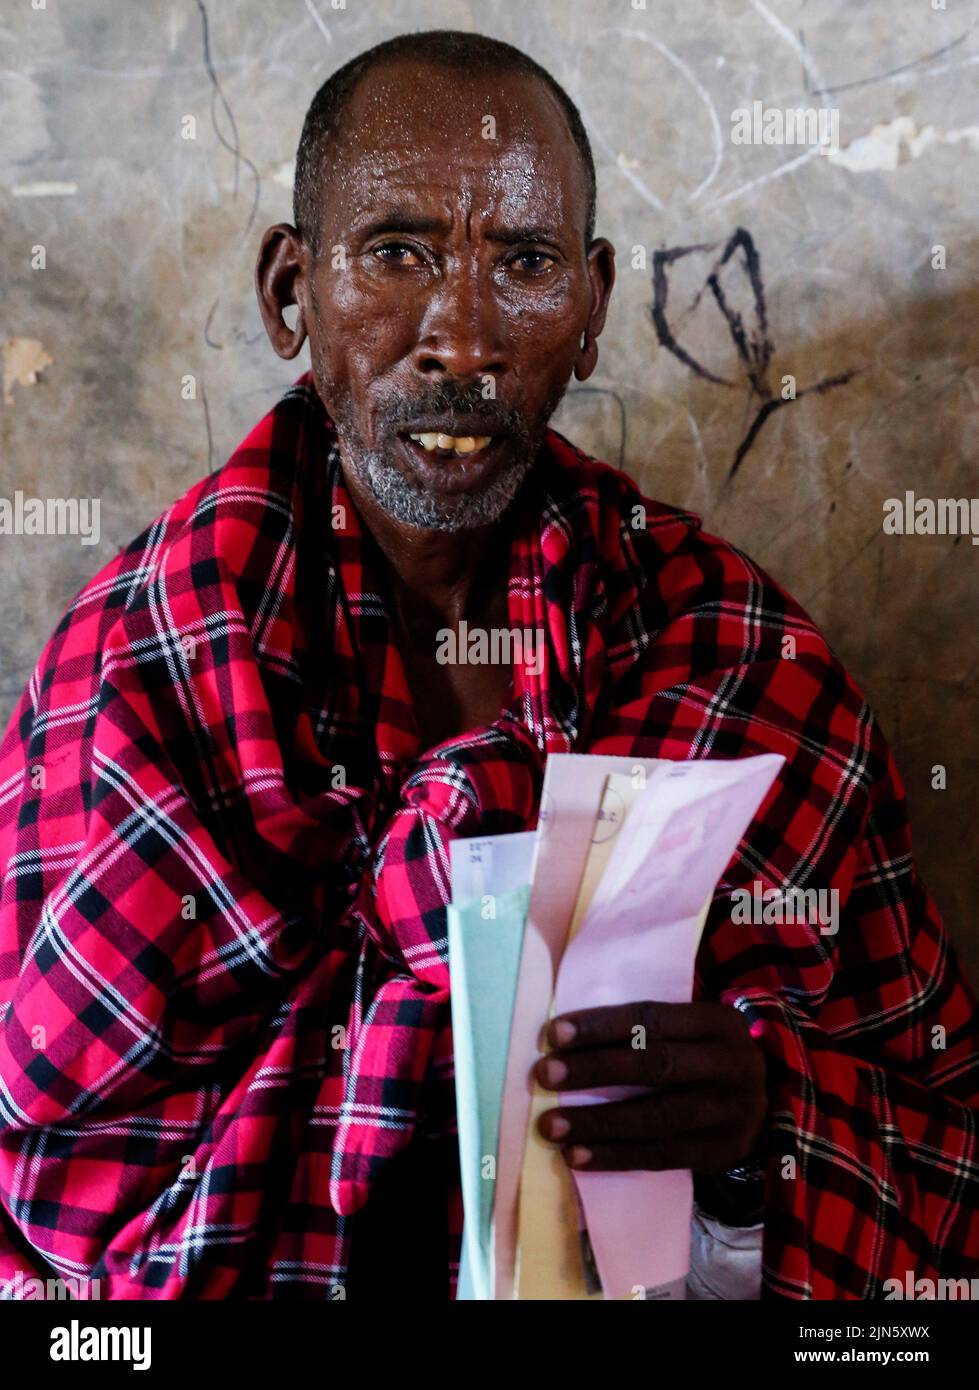 A Maasai traditional man waits near a voting booth at a polling centre before casting his ballot during the general election by the Independent Electoral and Boundaries Commission (IEBC) in Ewaso Kedong primary school, in Kajiado county, Kenya August 9, 2022. REUTERS/Thomas Mukoya Stock Photo